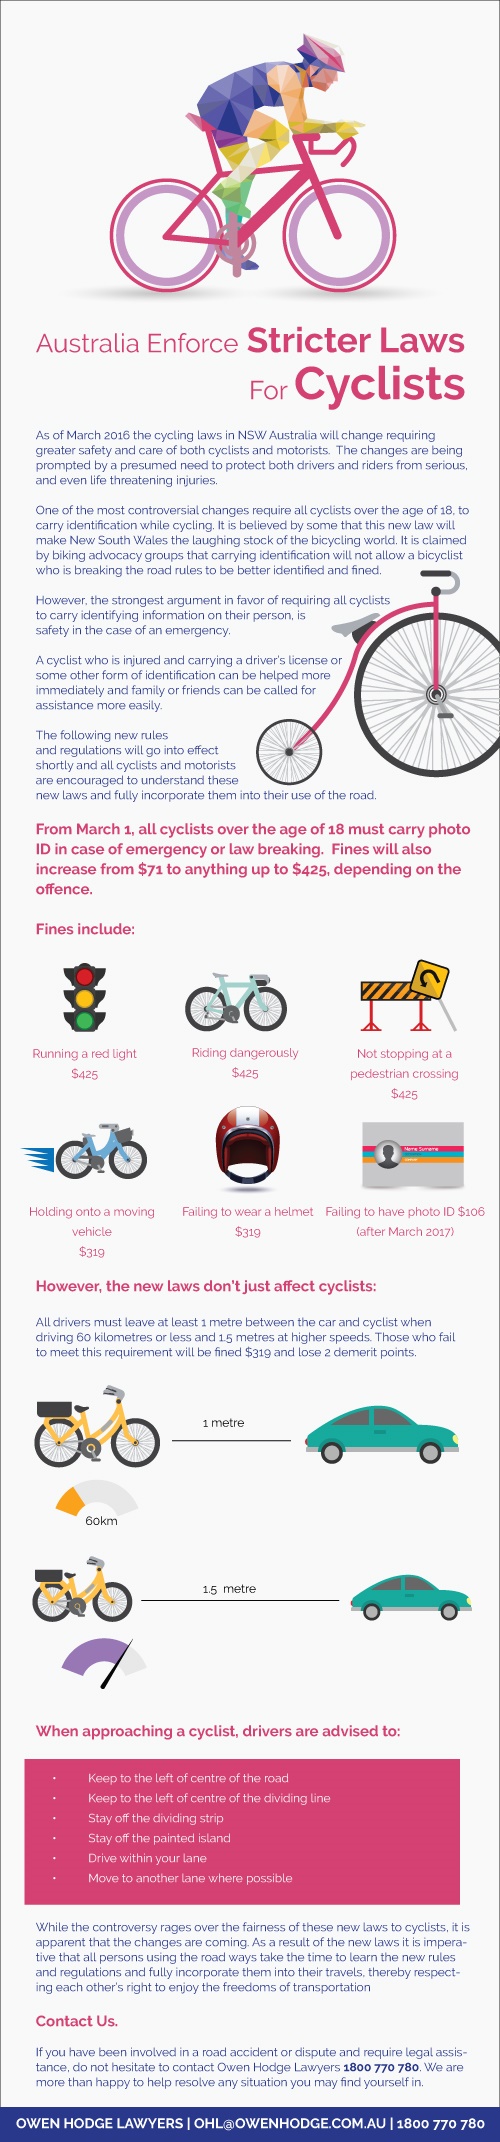 Australia-Enforce-Stricter-Laws-For-Cyclists---Blog-Post--13